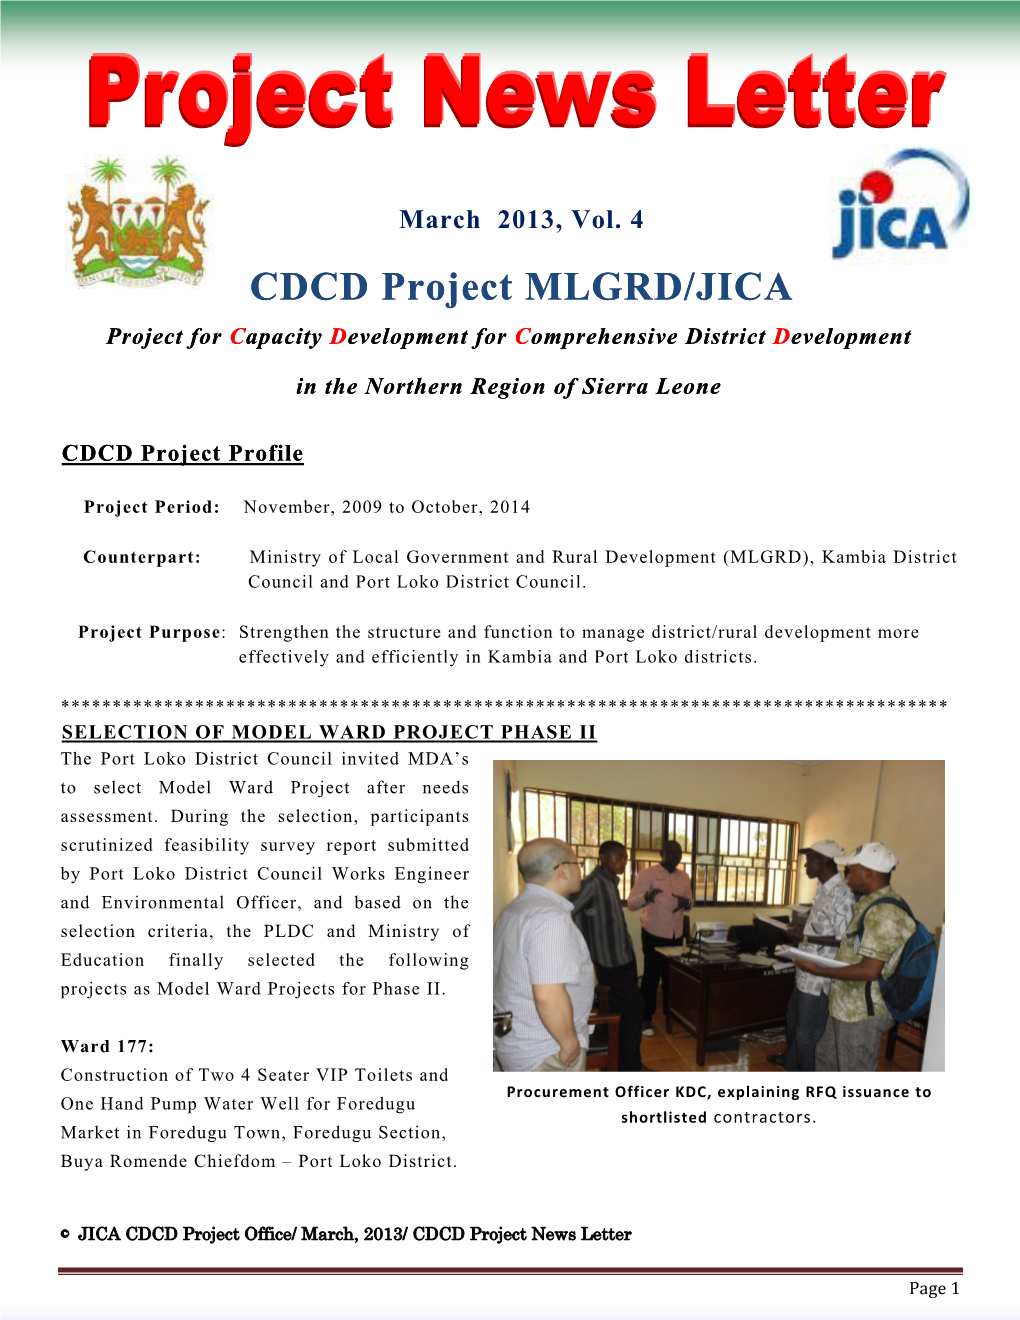 CDCD Project MLGRD/JICA Project for Capacity Development for Comprehensive District Development